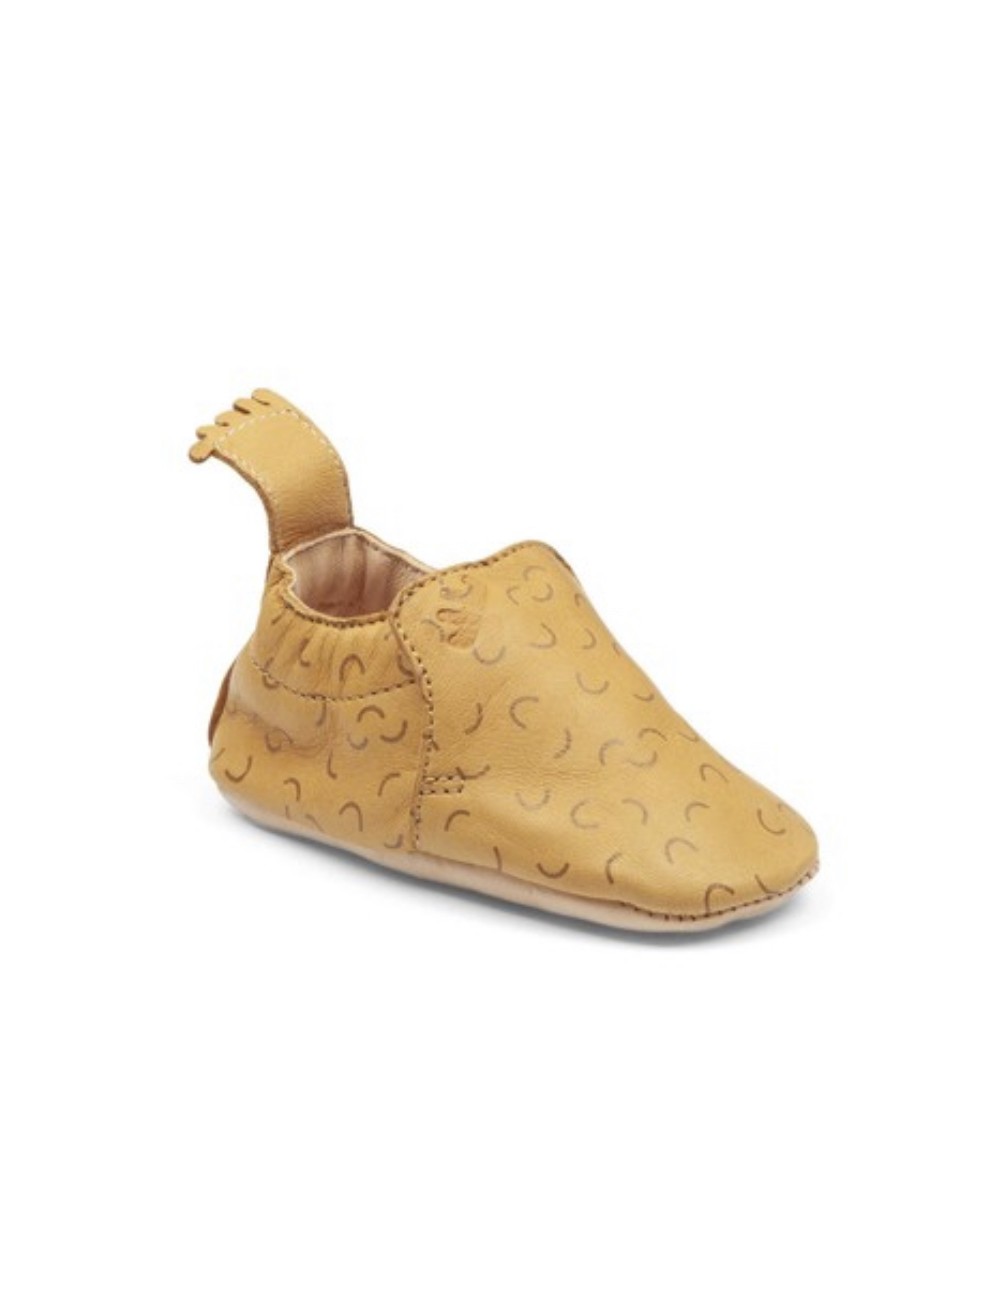 Chaussons blumoo camel conffetis